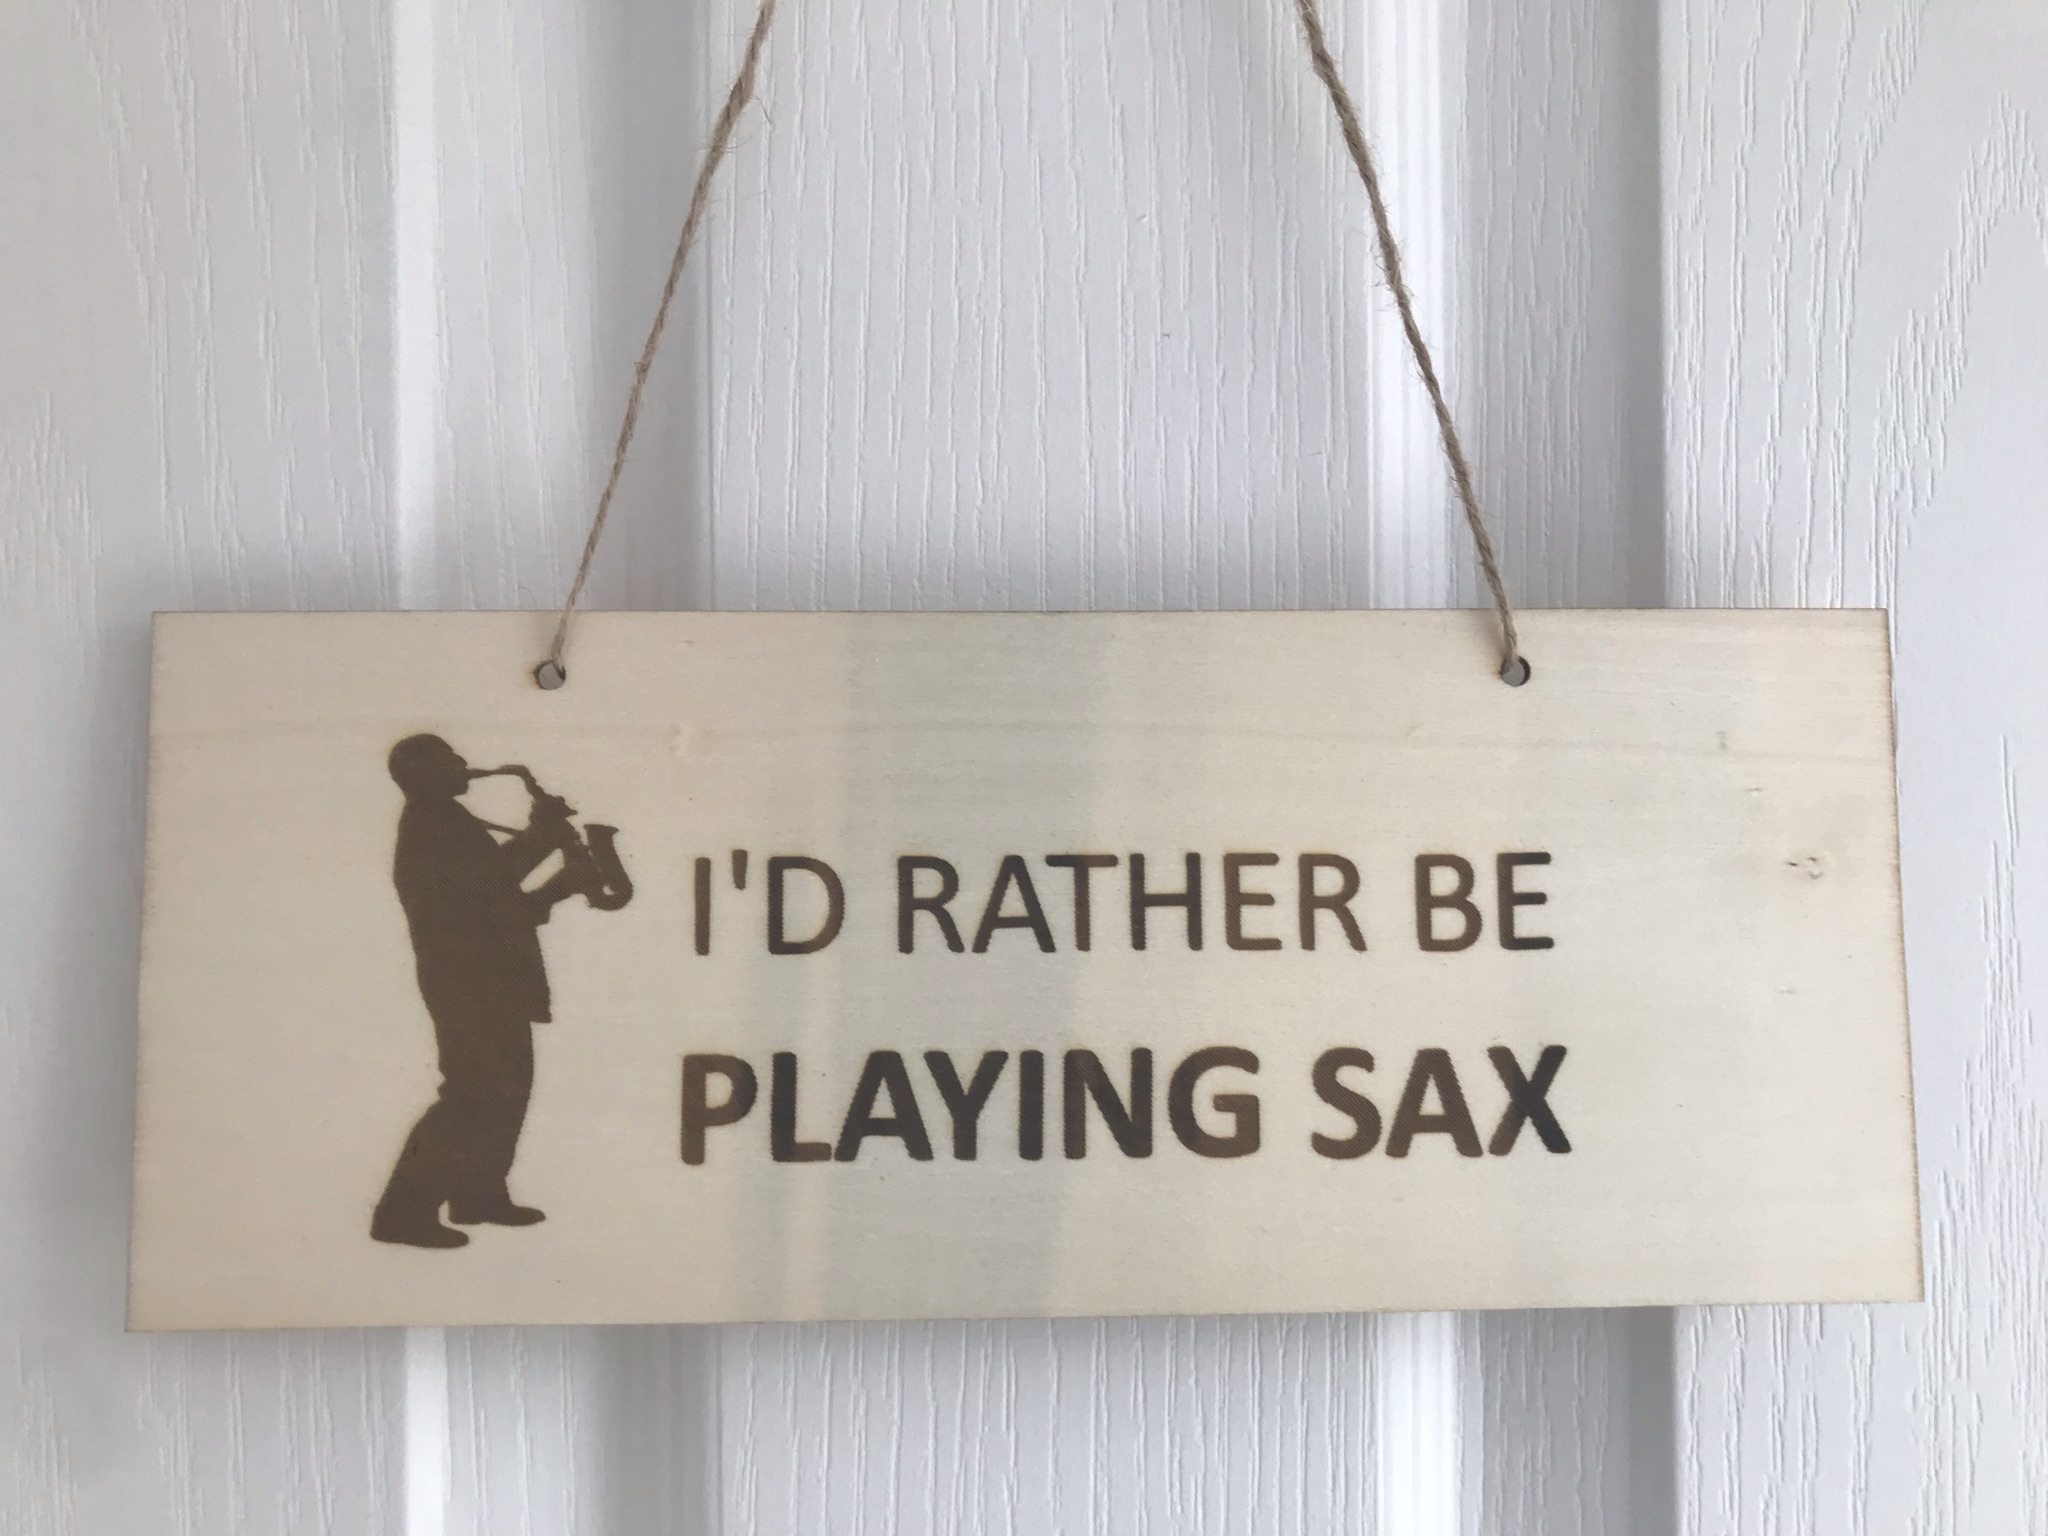 Rather be playing sax plaque